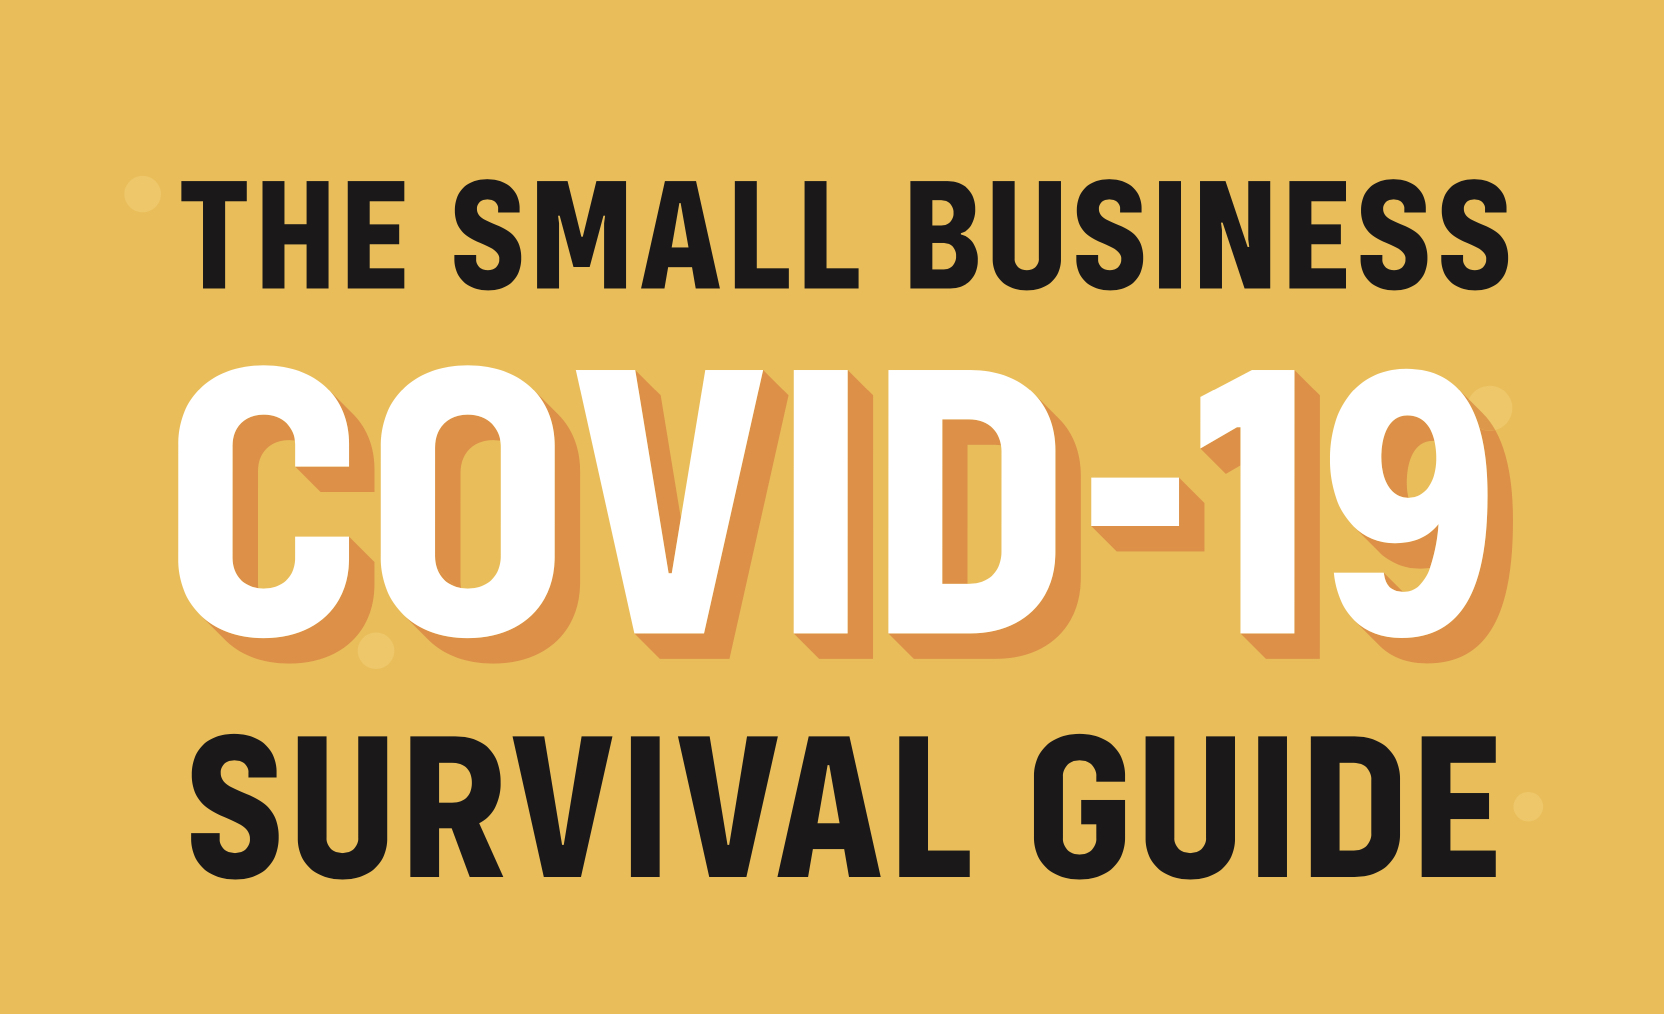 Small Business Survival guide to COVID-19 - Marnus Broodryk launches FREE eBook!